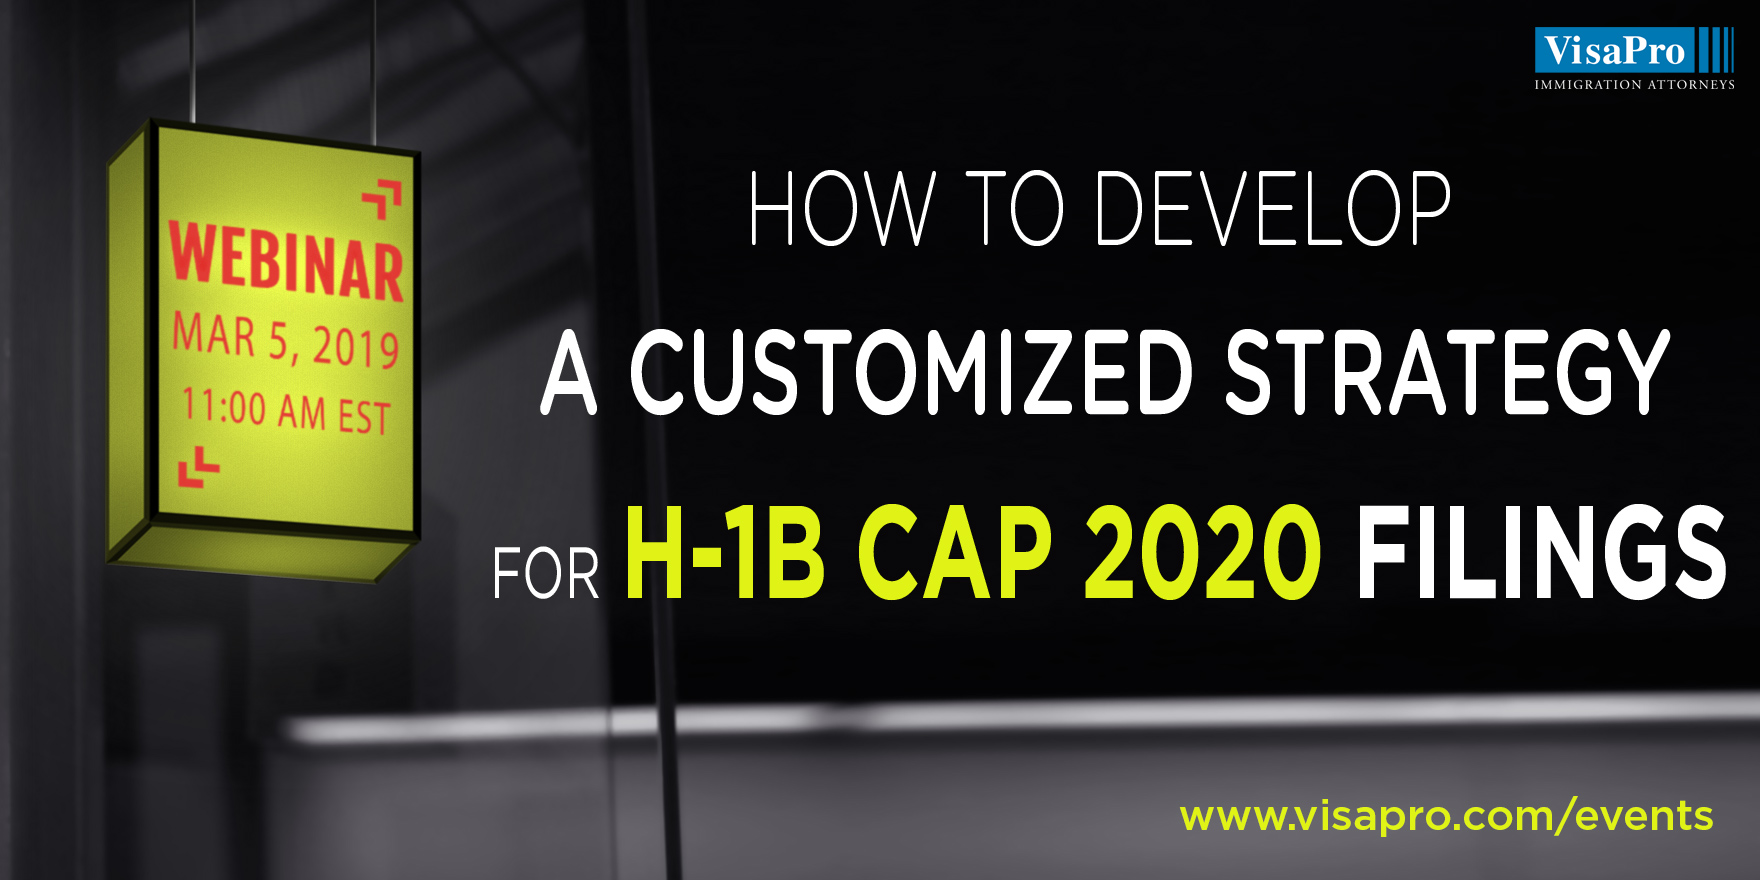 How To Develop A Customized Strategy For H-1B Cap 2019 Filings, Jerusalem, Israel